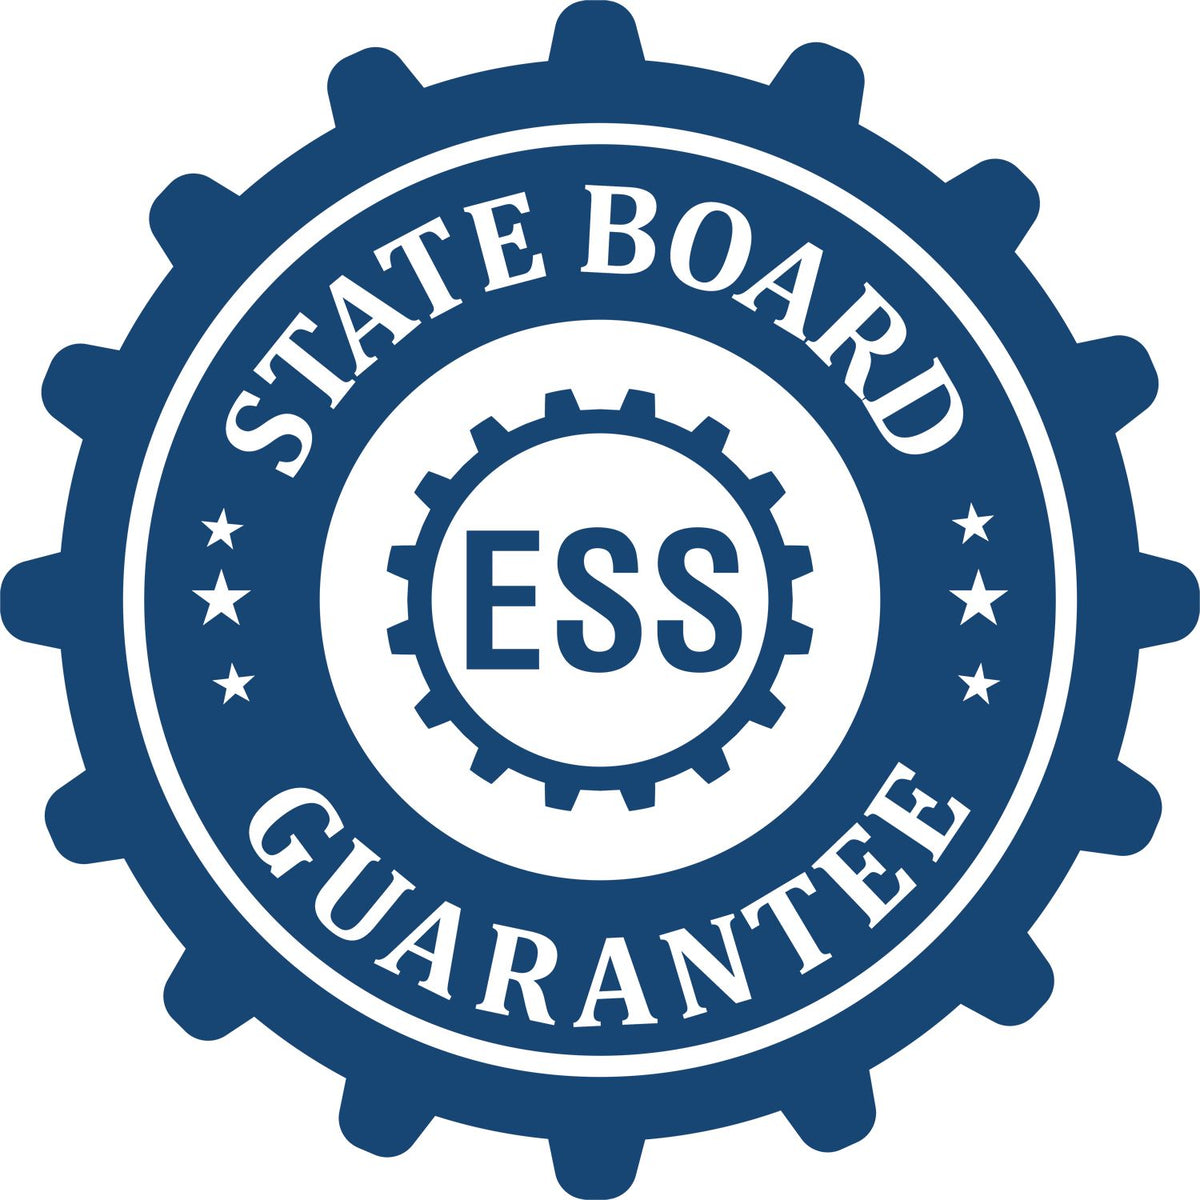 An emblem in a gear shape illustrating a state board guarantee for the Digital Louisiana Landscape Architect Stamp product.